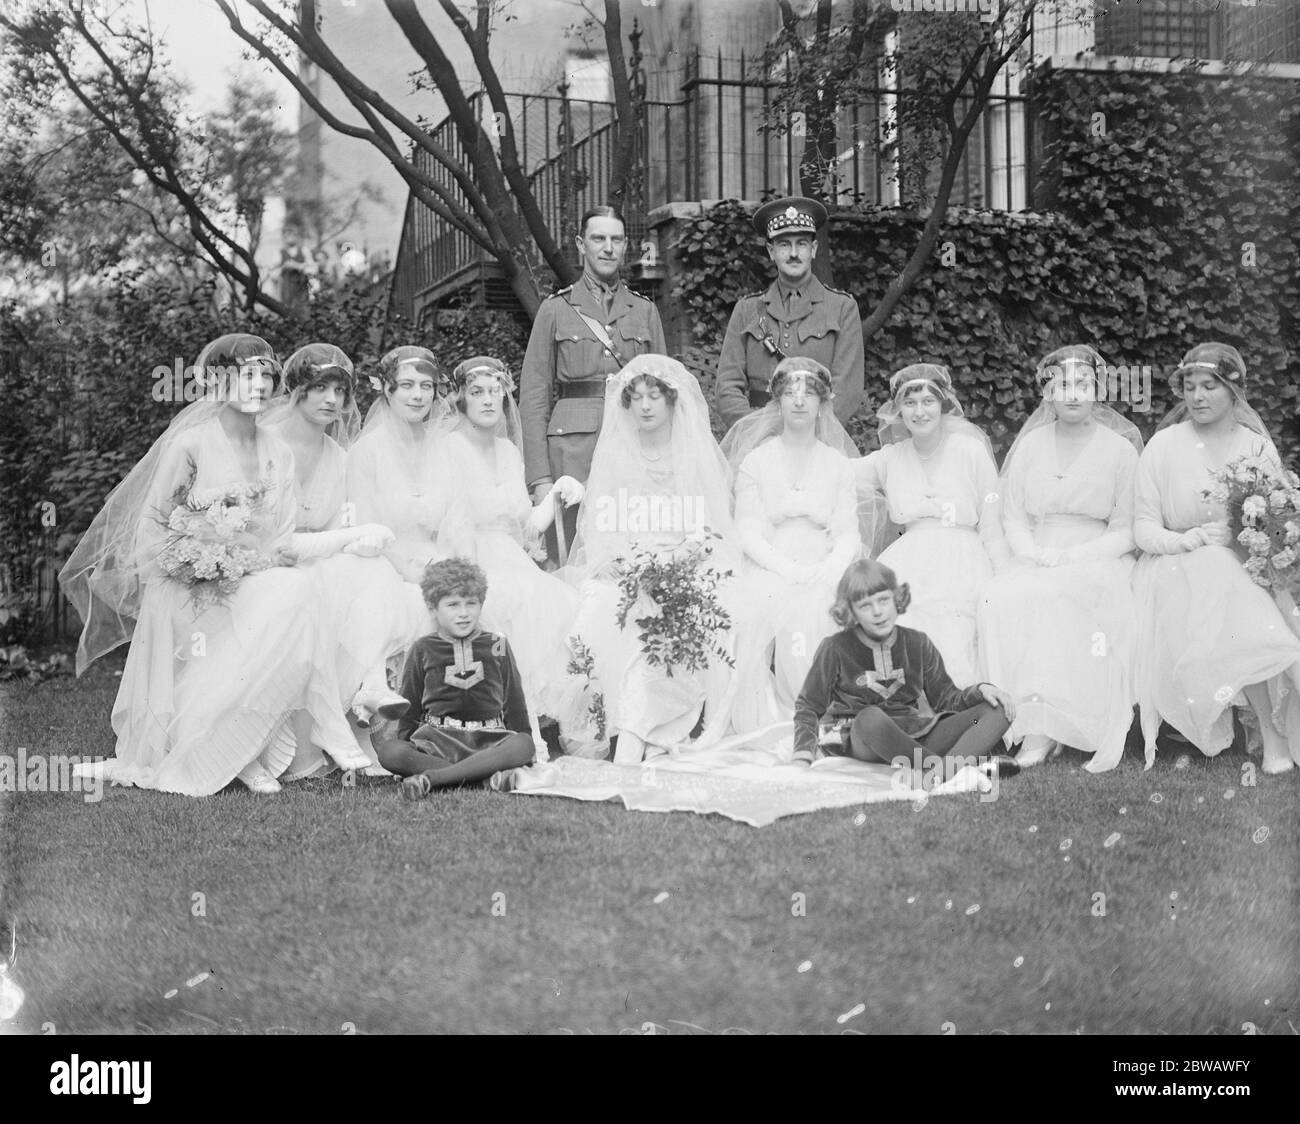 Wedding of the Hon Clarissa Tennant and Captain Adrian Bethall at St Margarets Church Westminster A group of the bridesmaids first row left to right The bridegroom ( CAptain Adrian Bethell ) and his best man Lord Cochran 2 nd row left to right Miss Tennant , Miss Farquharson , Miss Boyd , Lady Mary Charteris , The Bride , Miss Bethell , Miss O ' Wyndham , Miss L Adean 3rd row left to right , The Viscount Carlow Hon S Tennet and the pages of honour 1916 Stock Photo